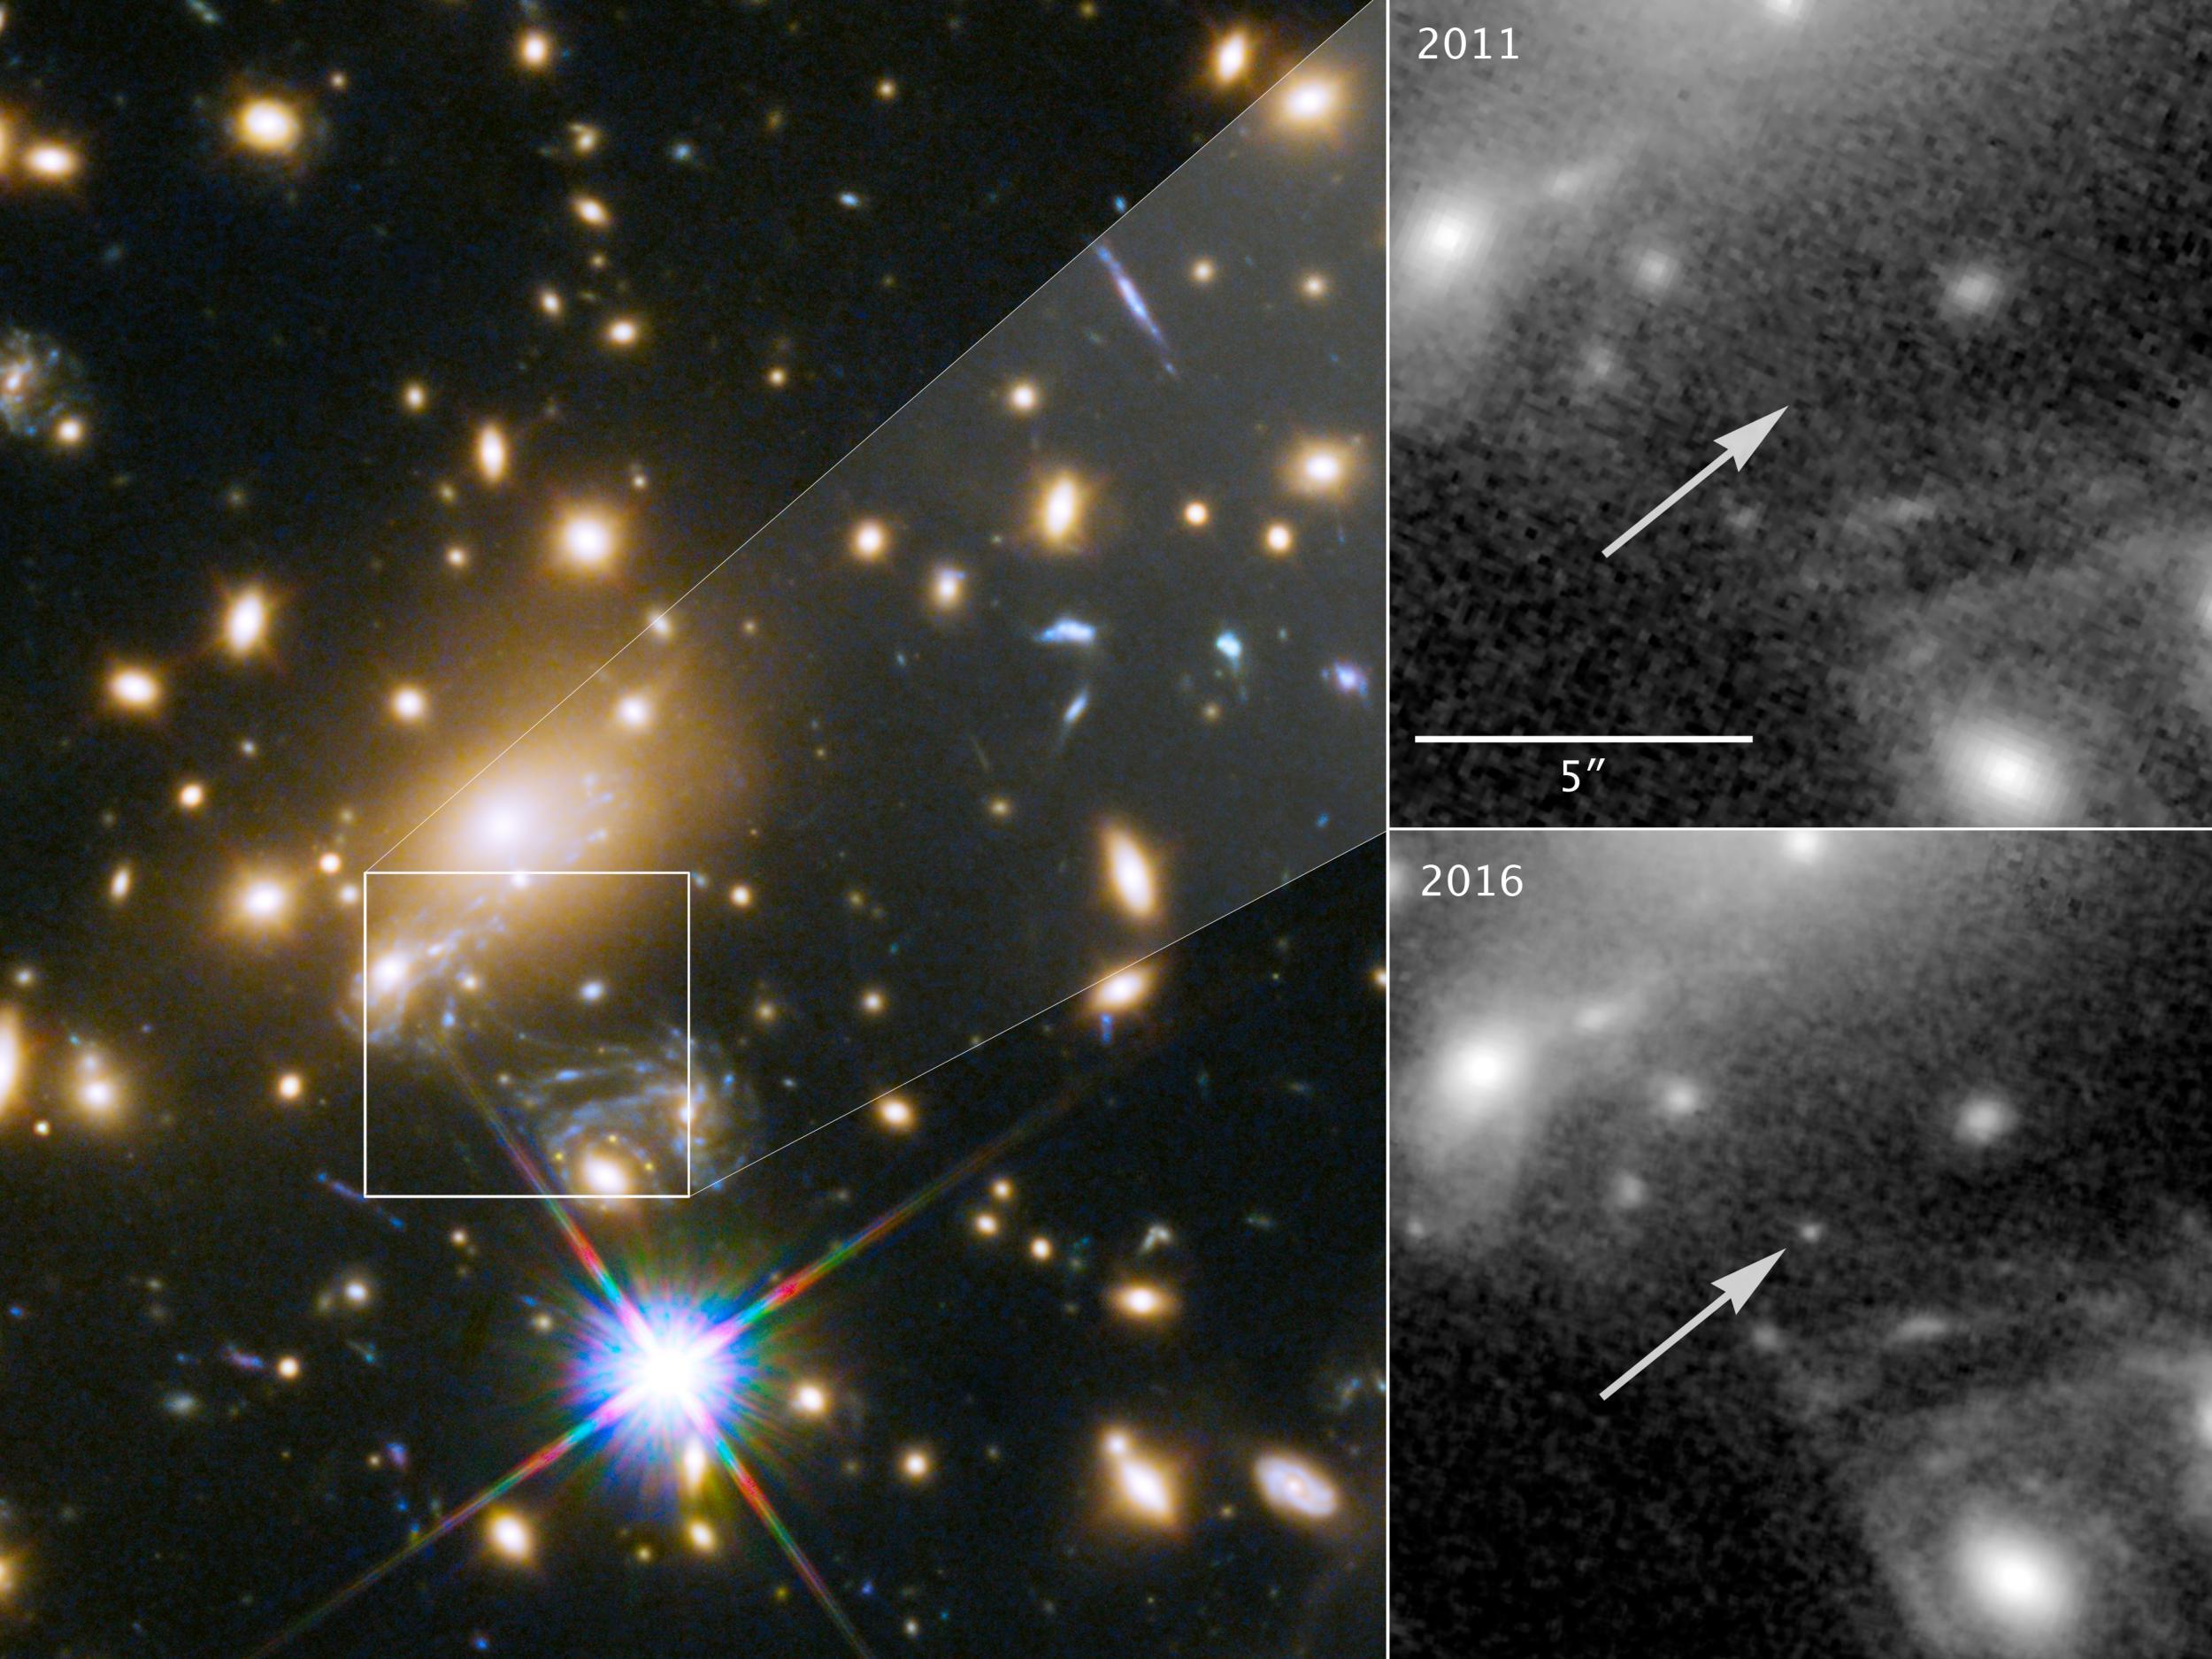 Most distant star ever seen spotted by Hubble telescope 9 billion